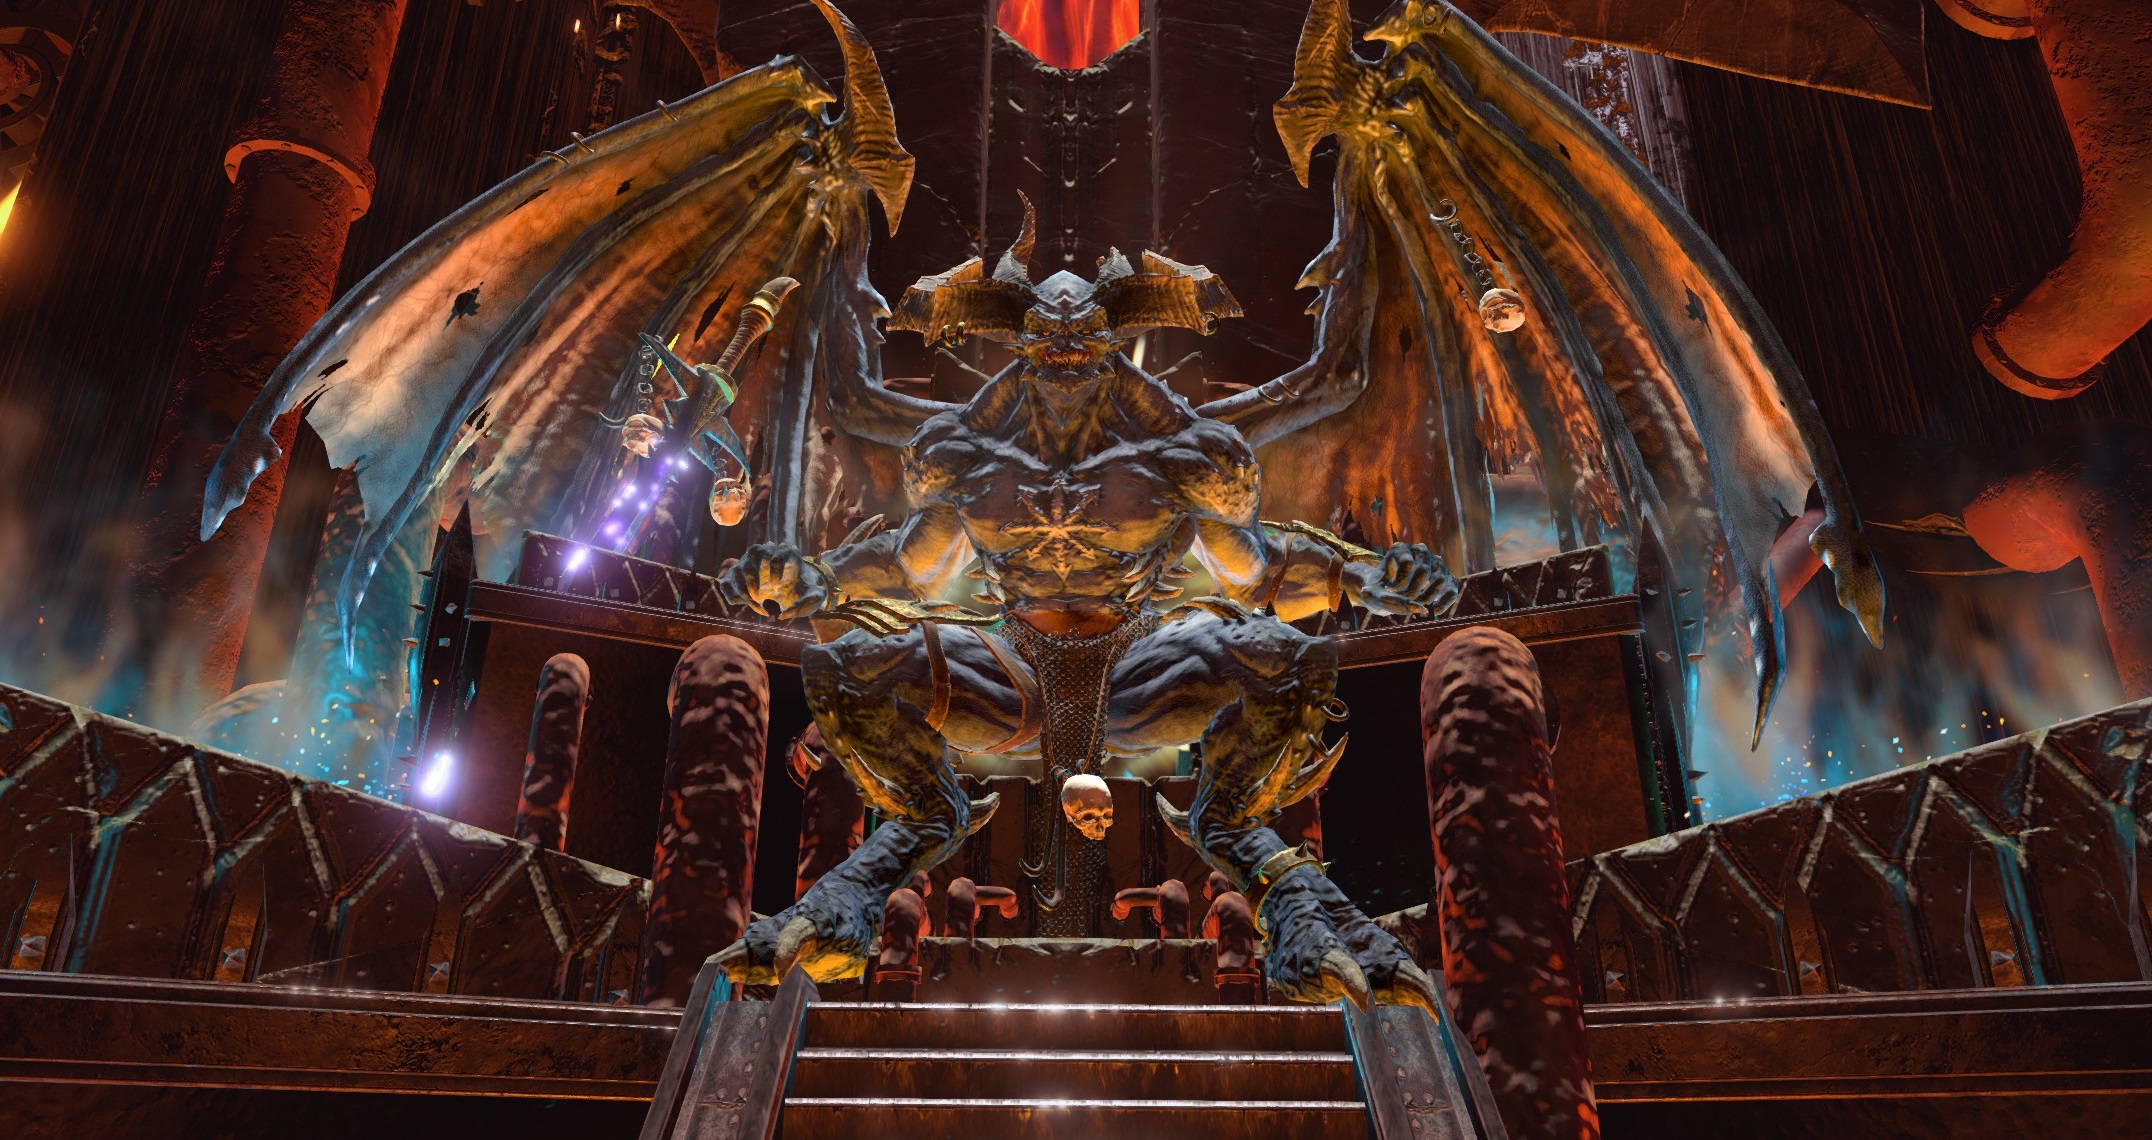 Be'lakor, sitting on this throne